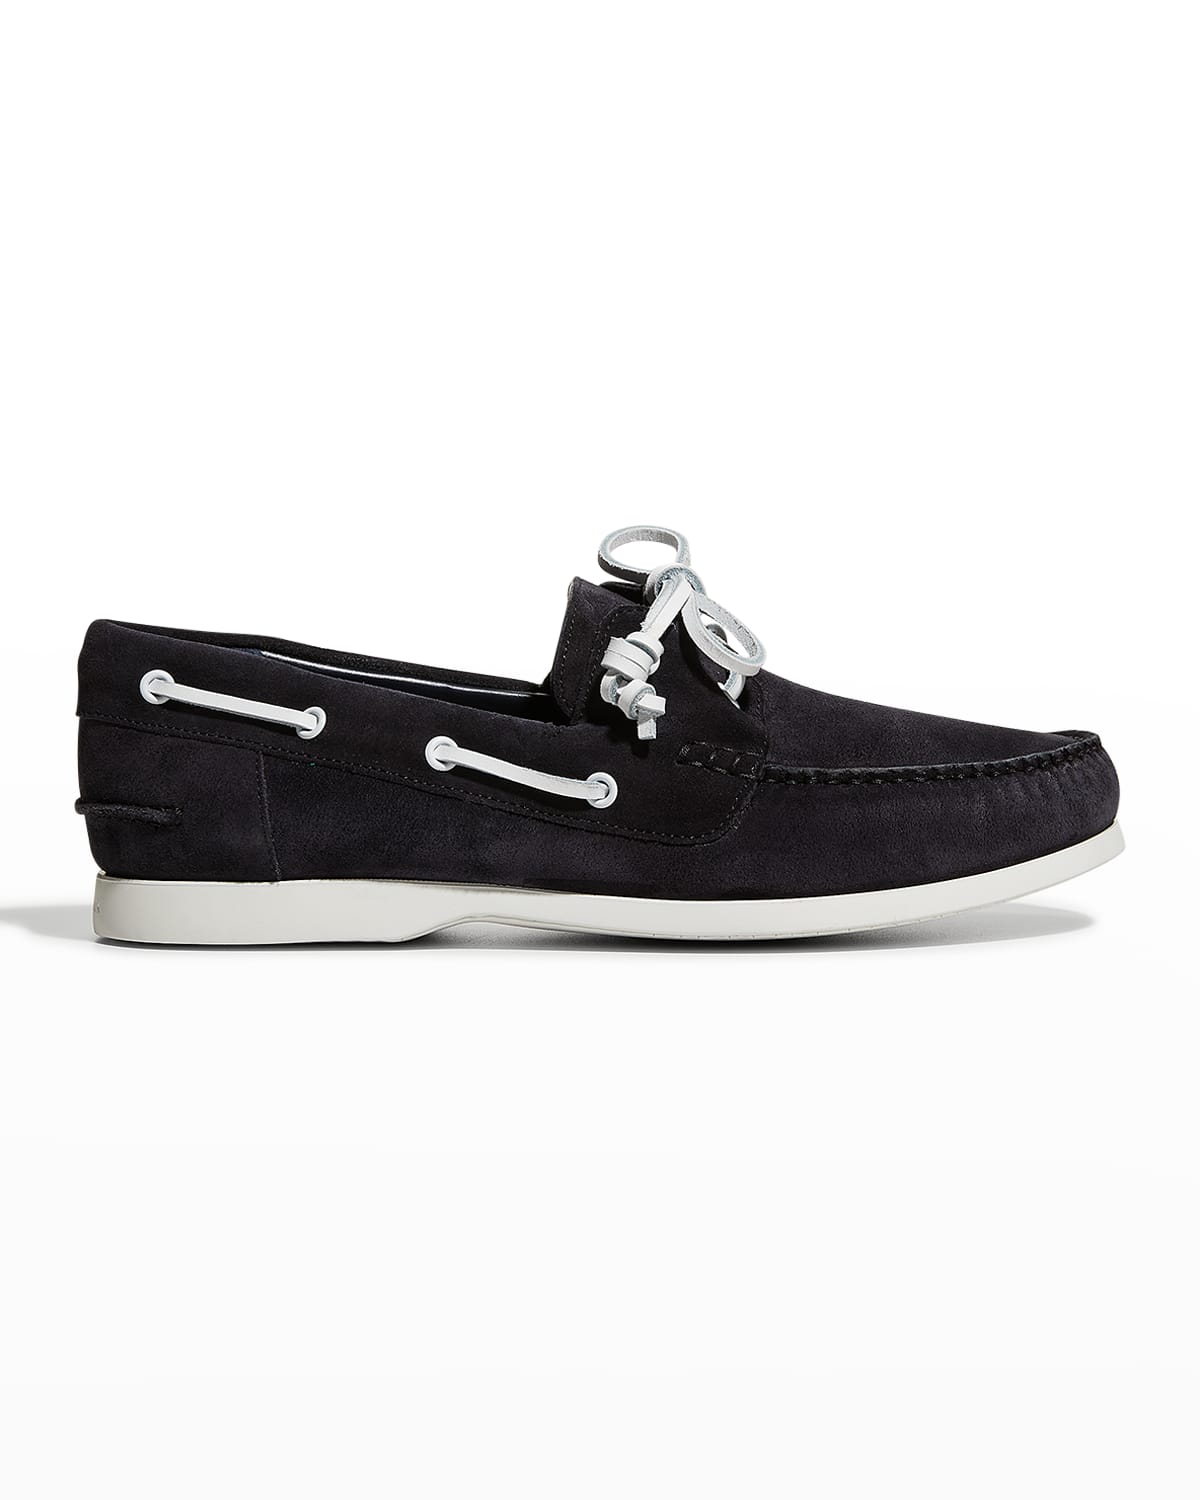 Men's Sidmouth Suede-Leather Boat Shoes